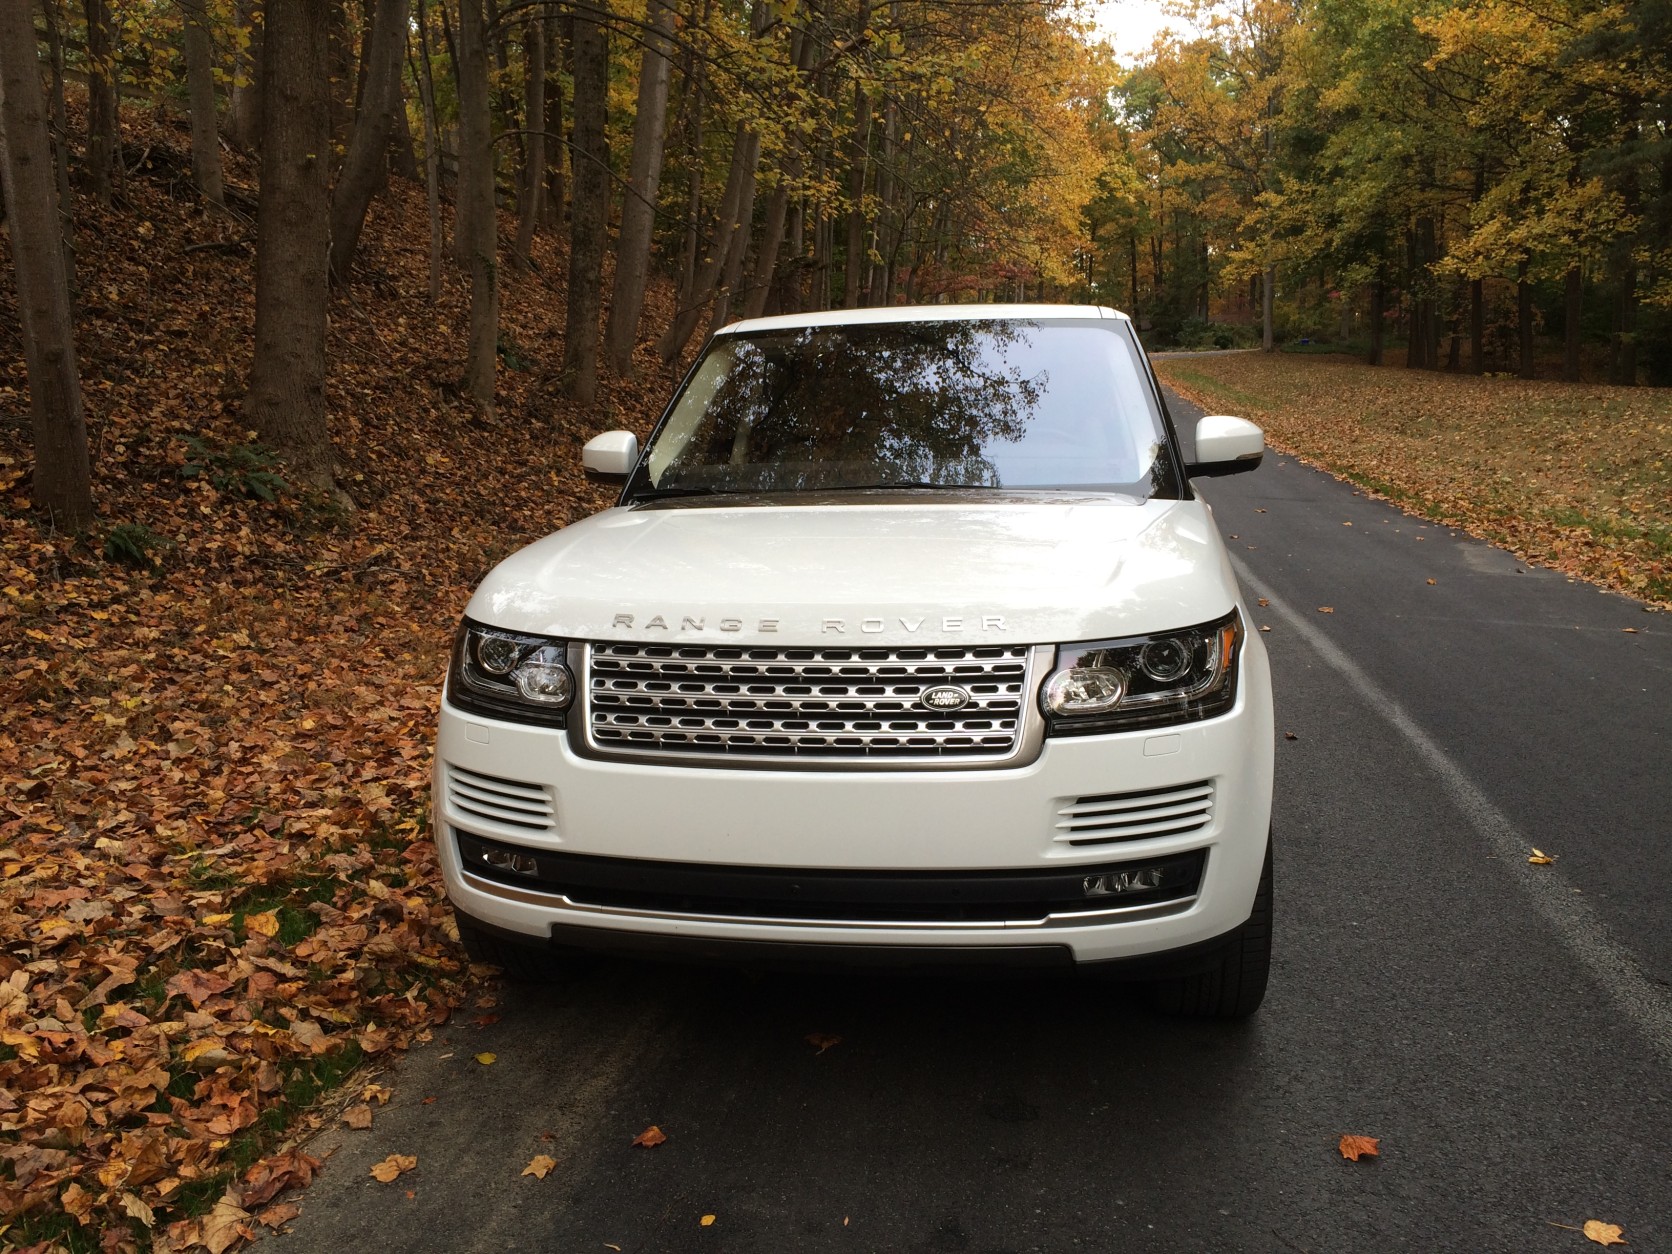 The Range Rover has the right amount of luxury and coolness to appeal to many people. It now offers a standard supercharged V6 with decent performance and improved fuel economy without really sacrificing what a Range Rover should be, except for fewer visits to the gas station. (WTOP/Mike Parris)